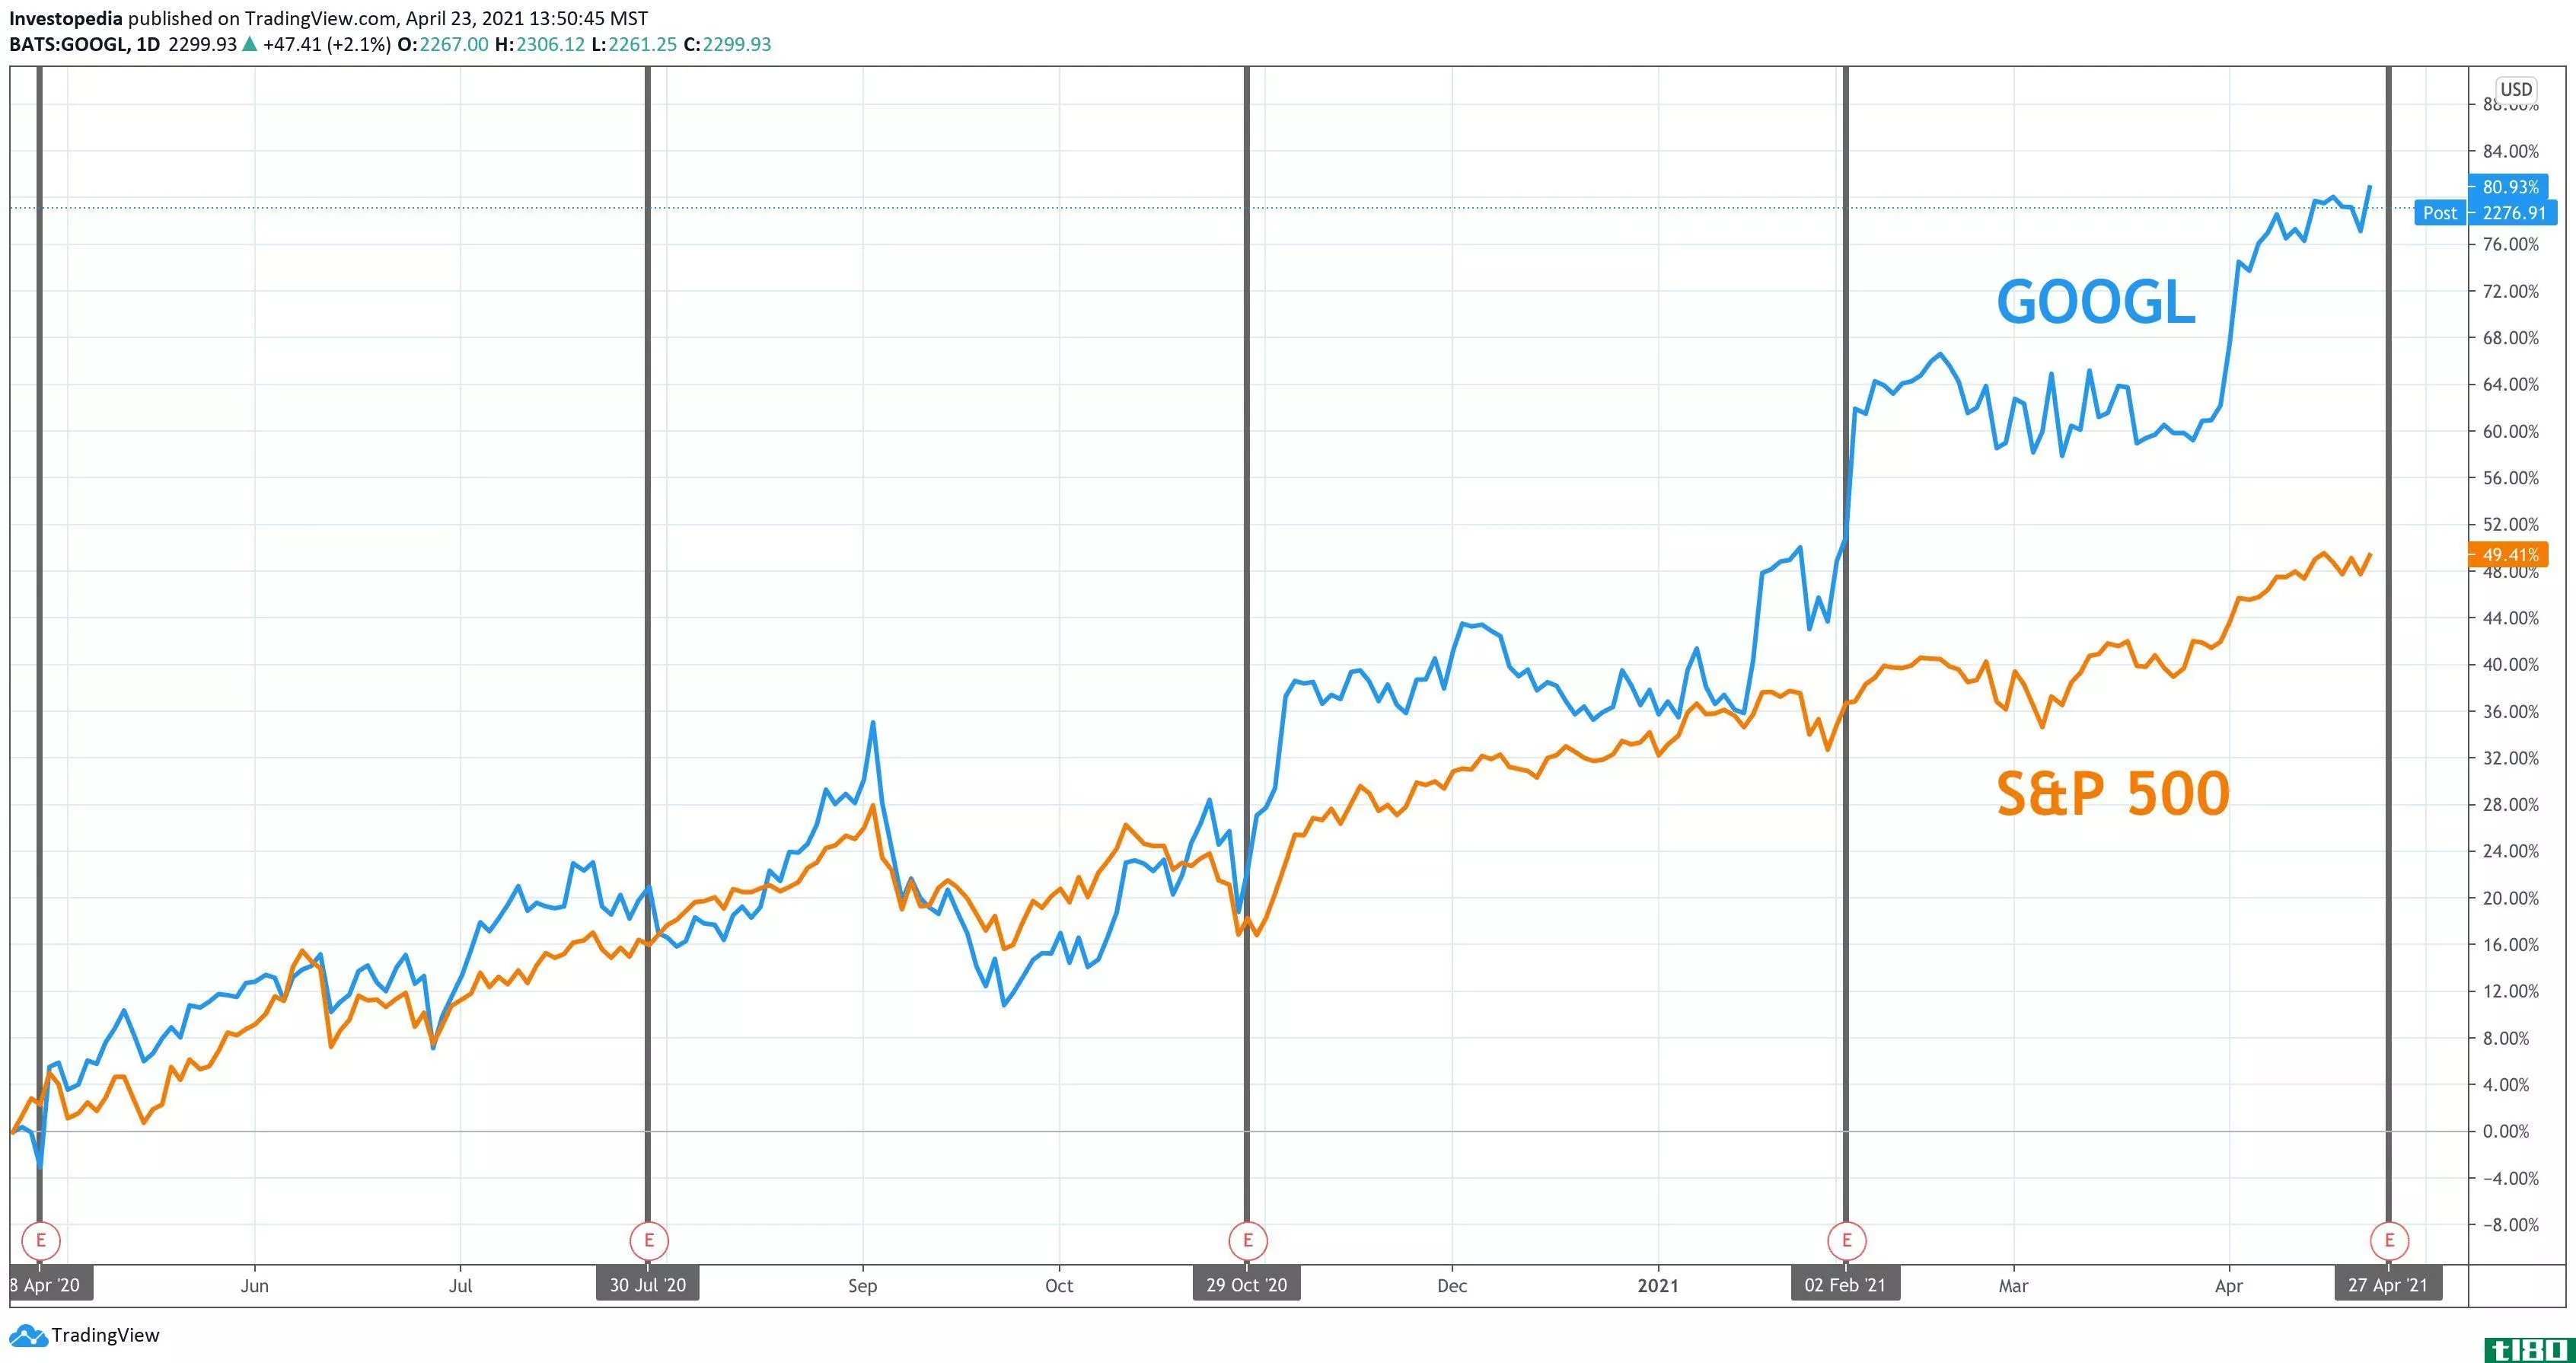 One Year Total Return for S&P 500 and Google (Alphabet)